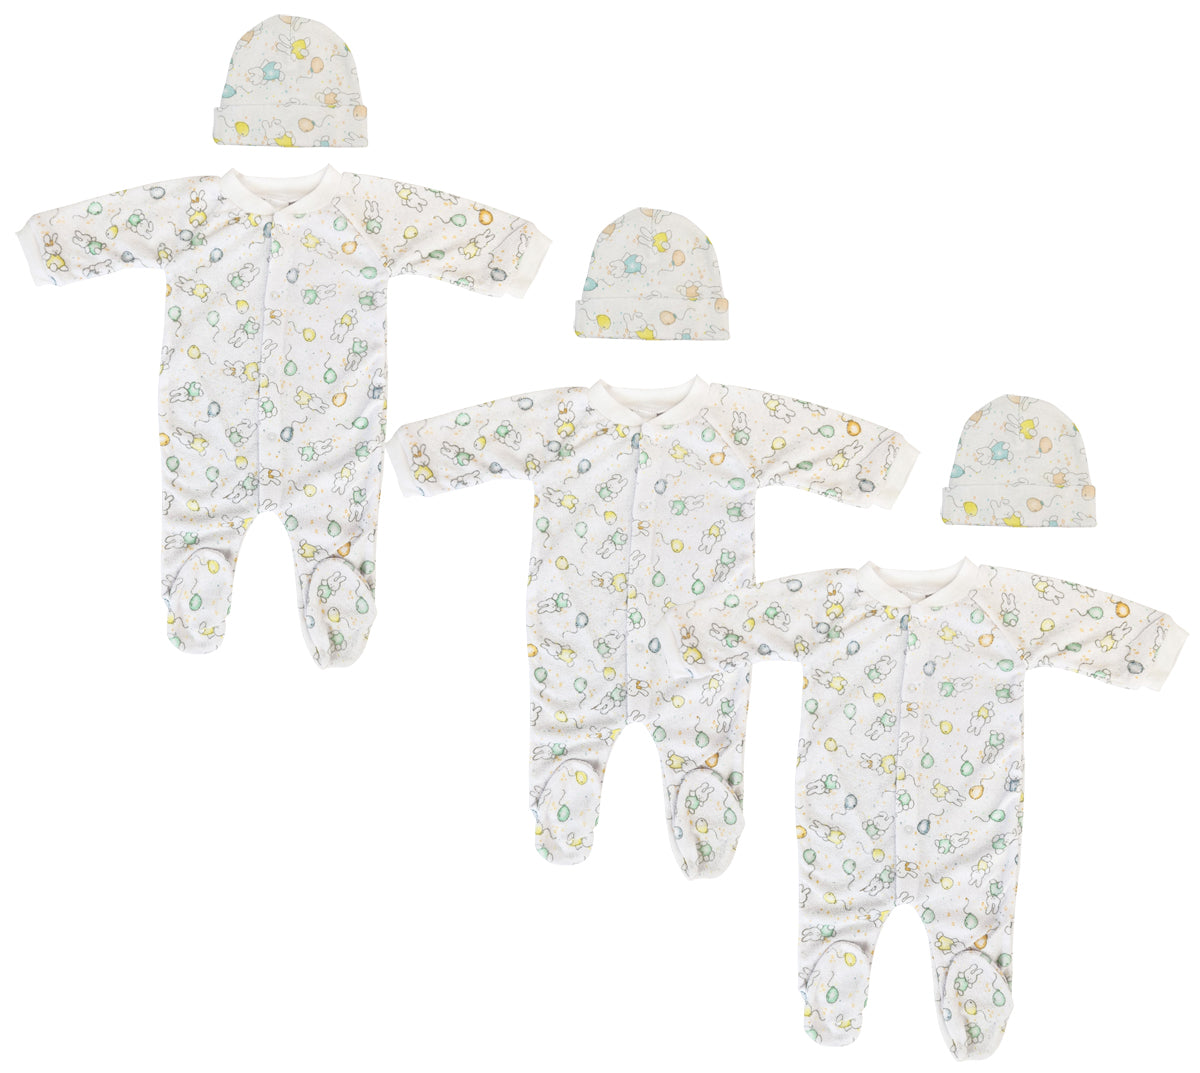 Unisex Closed-toe Sleep & Play with Caps (Pack of 6 ) NC_0700